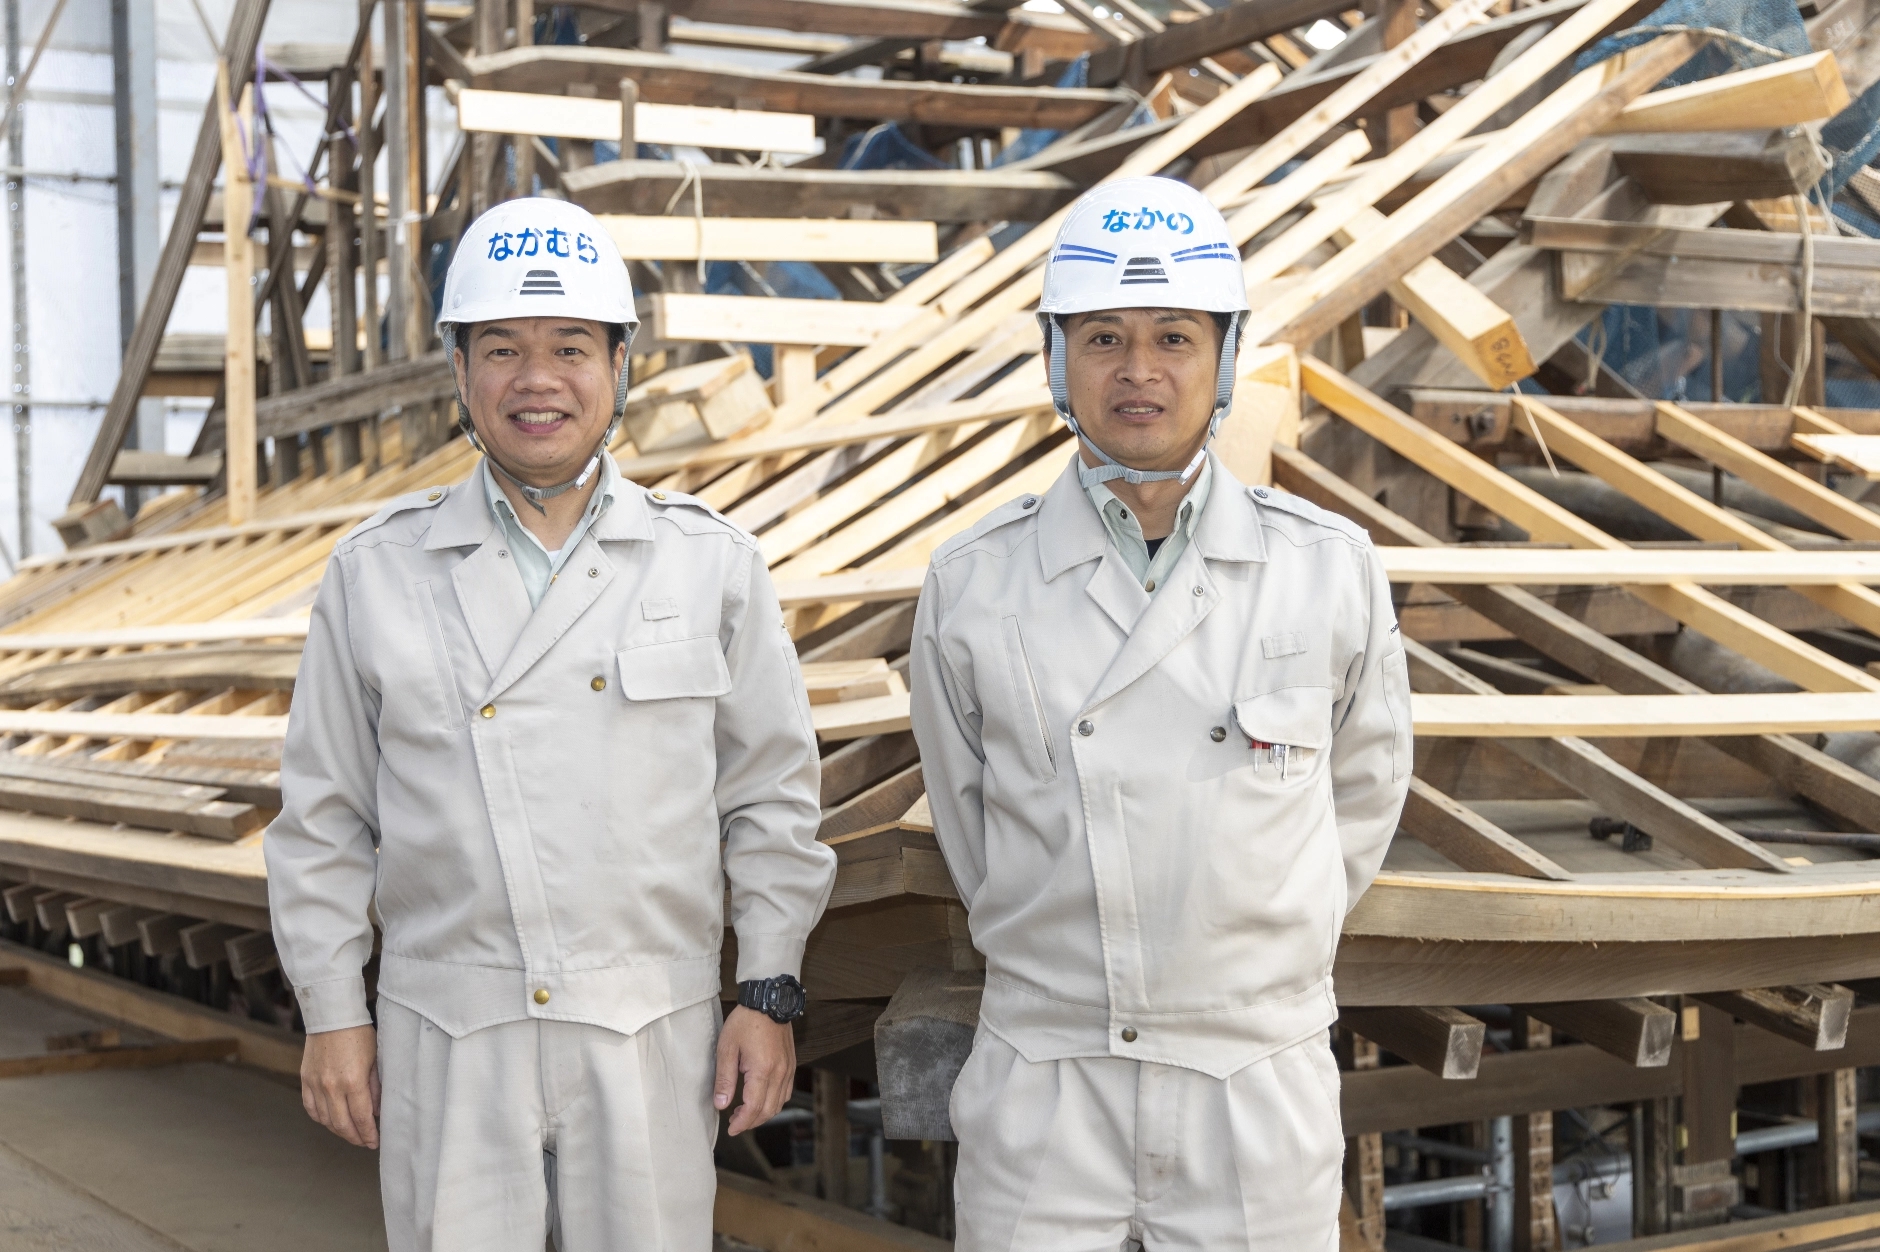 Kunimitsu Nakamura of the Temples Shrines Construction & Residential Division of the Tokyo Branch (left) and Tsuyoshi Nakano of the Matsue Office of the Hiroshima Branch